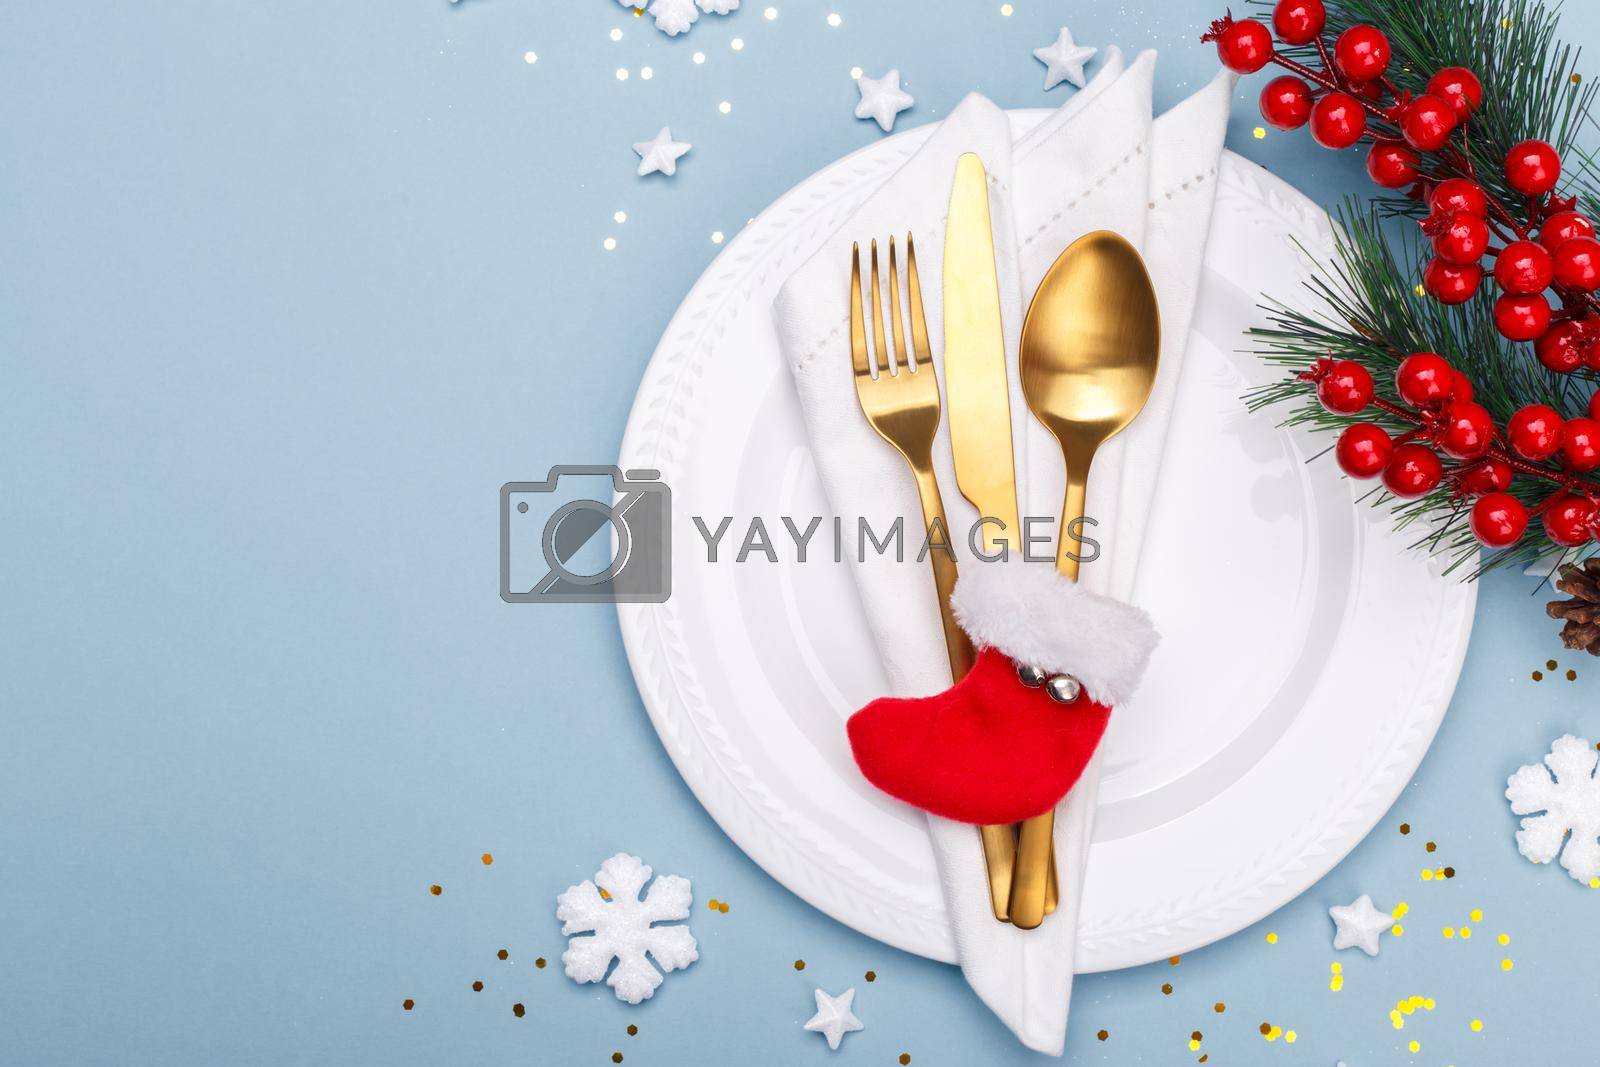 Royalty free image of Christmas or new year table setting with golden cutlery  by Lana_M